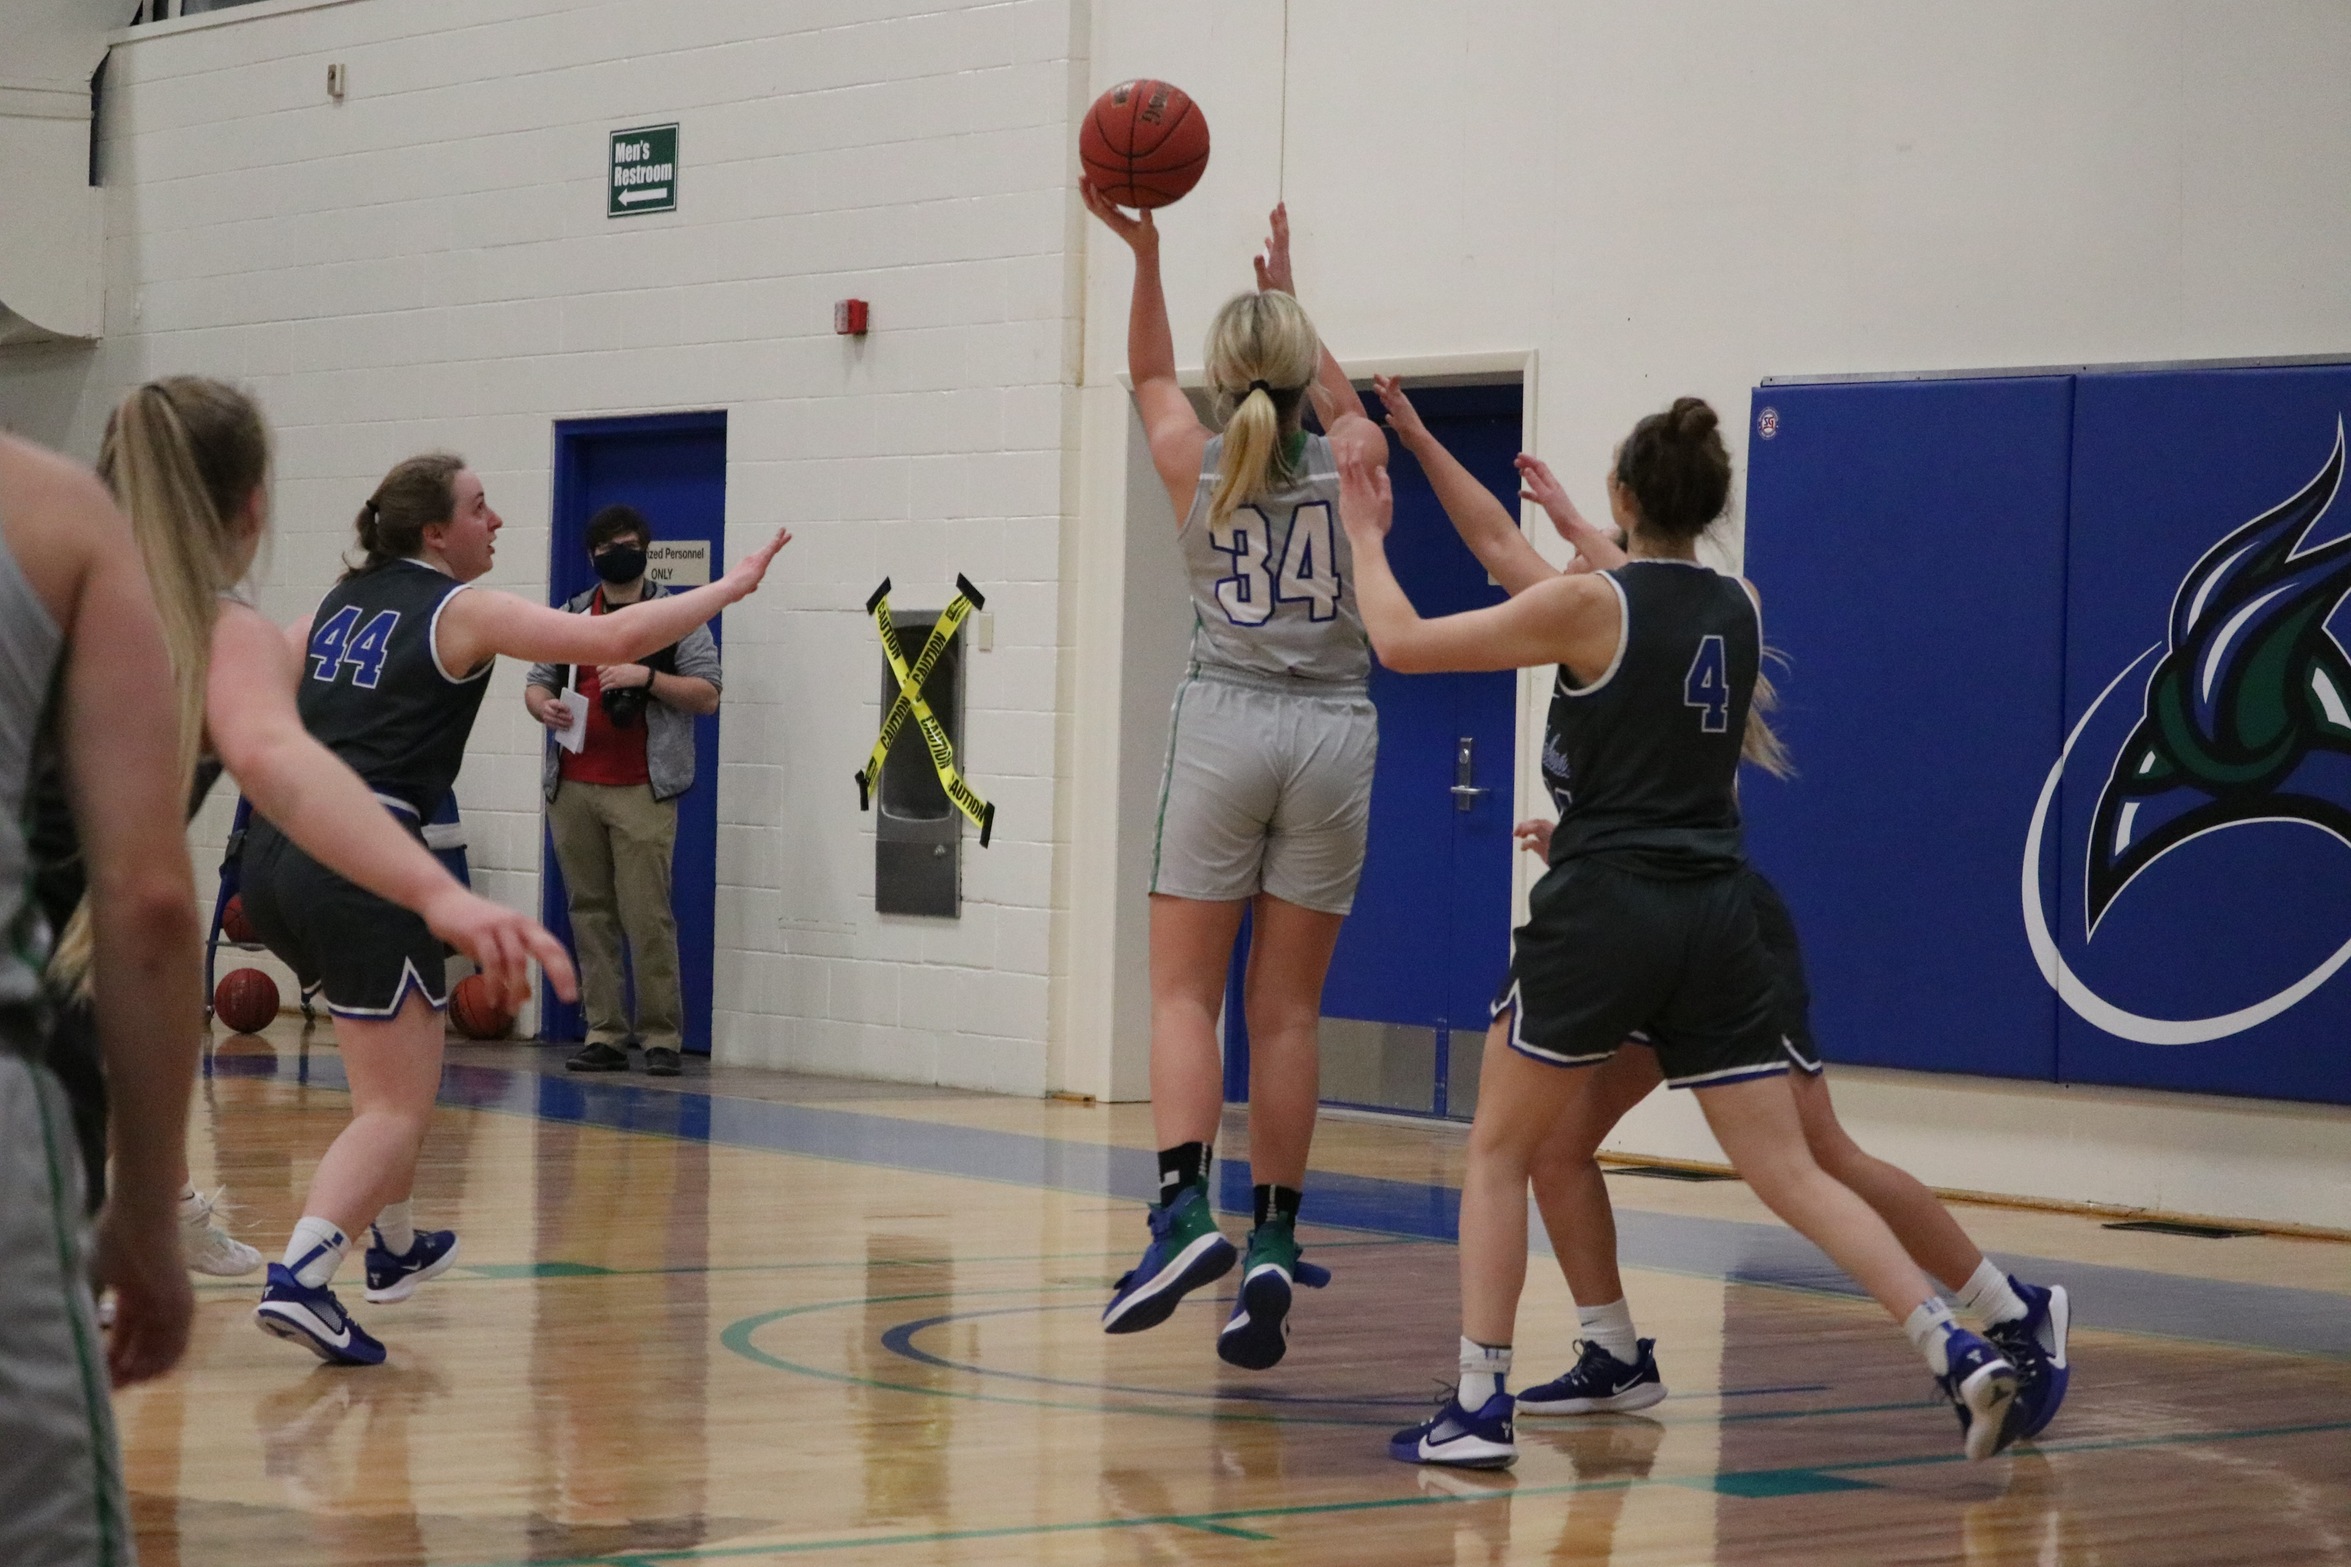 Lauryn Bloniarz shoots a layup in the lane, a defender behind her